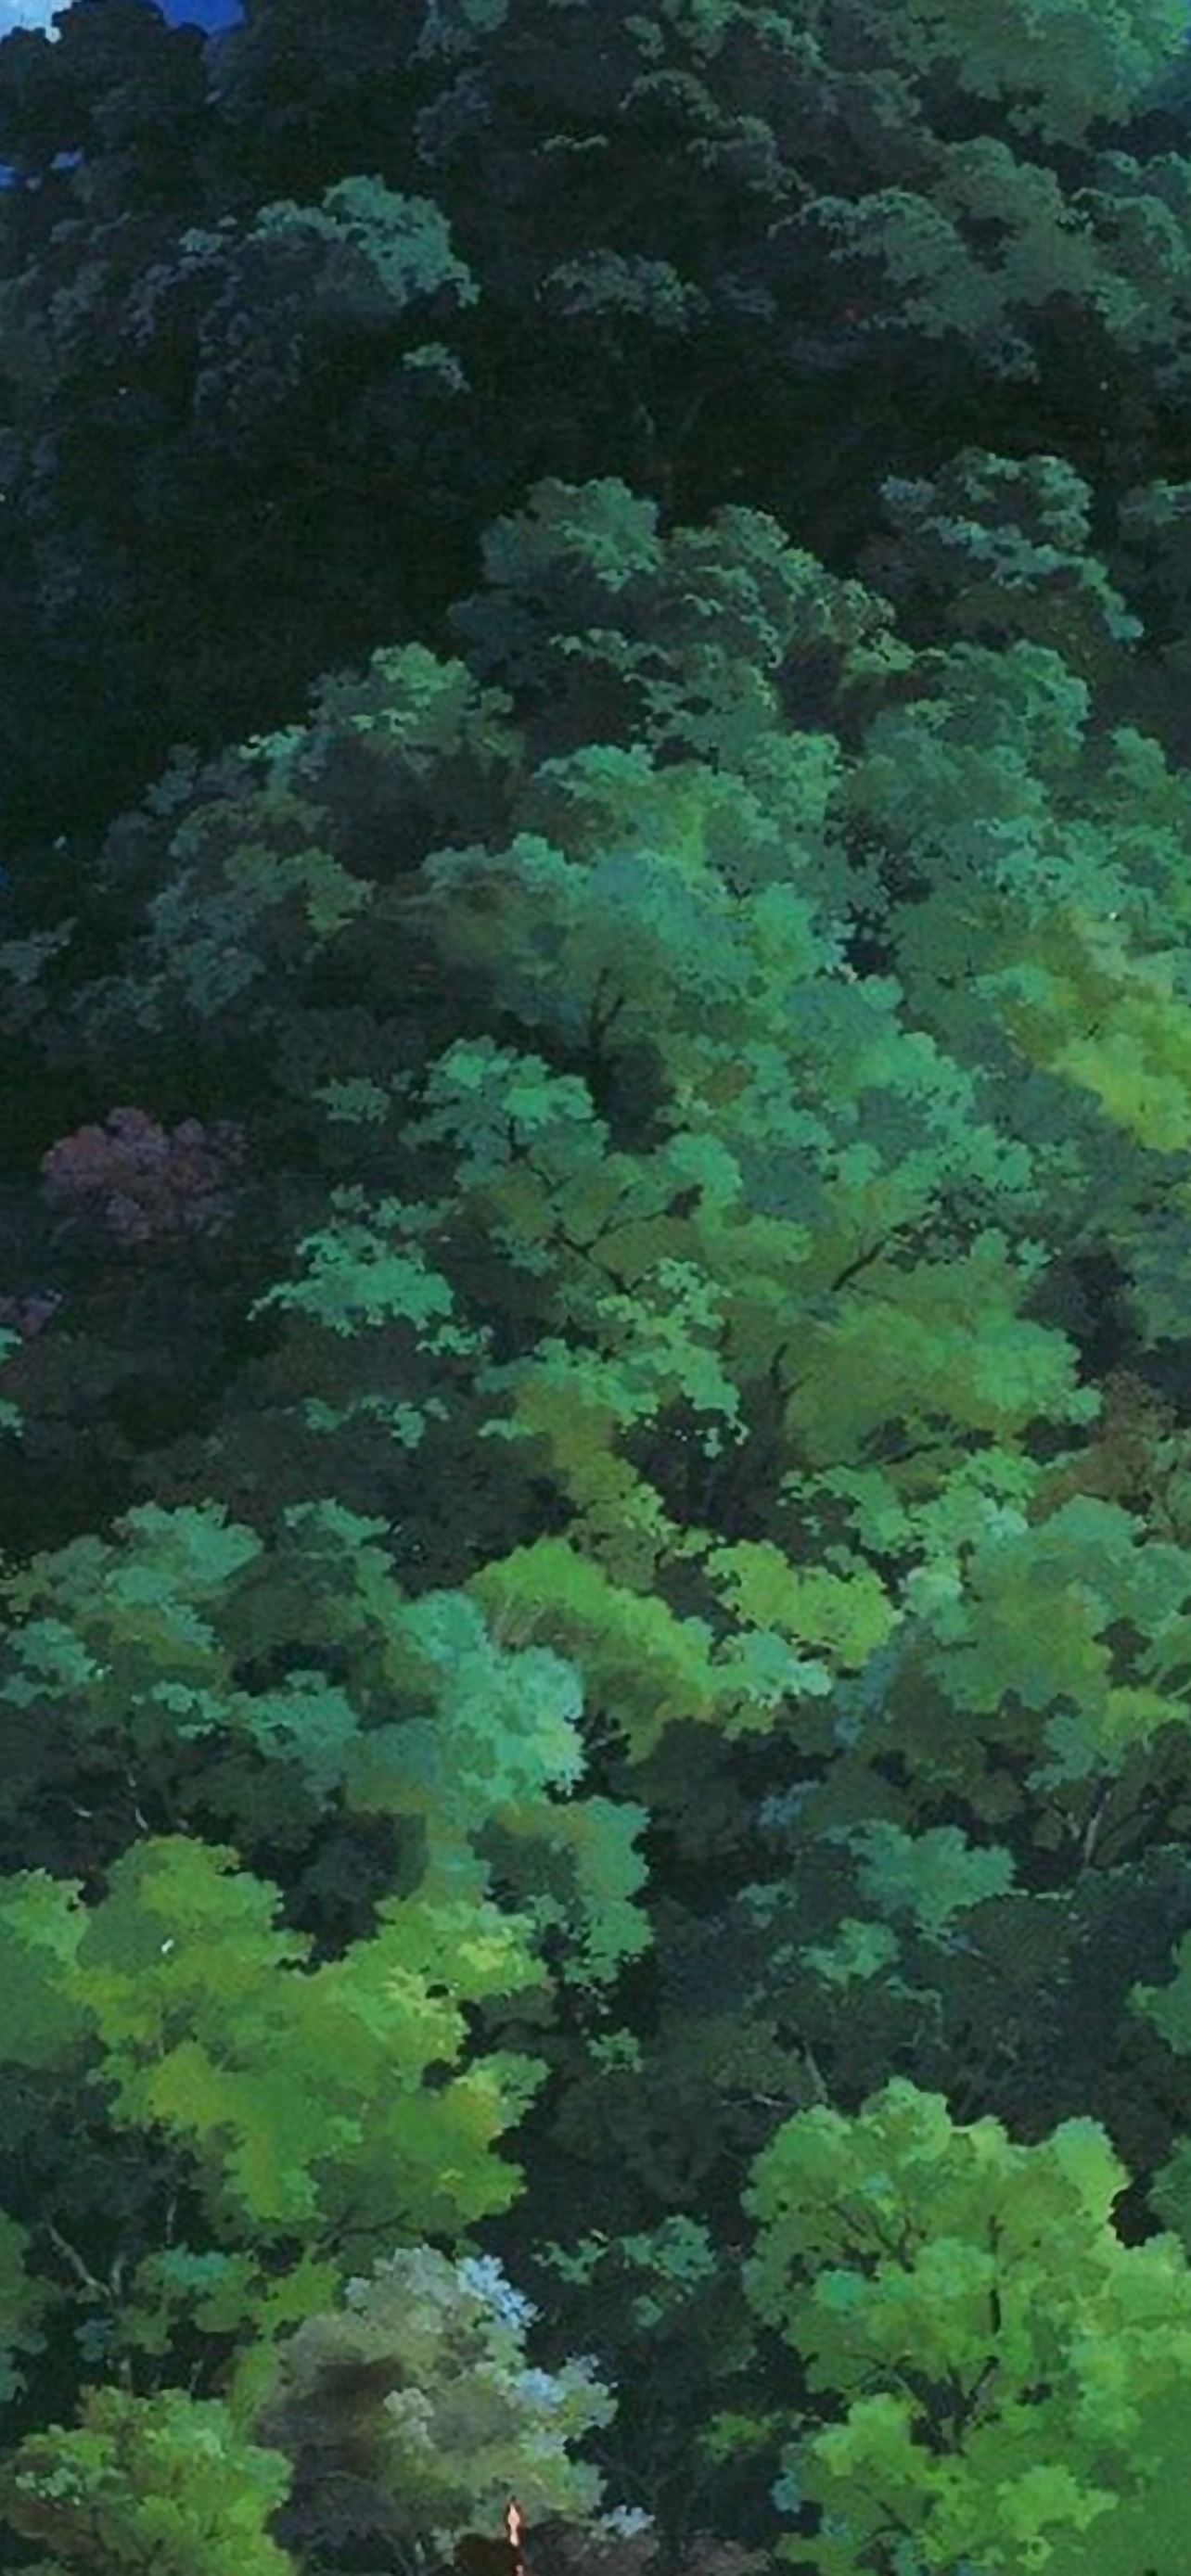 A painting of an animated forest with trees - Anime landscape